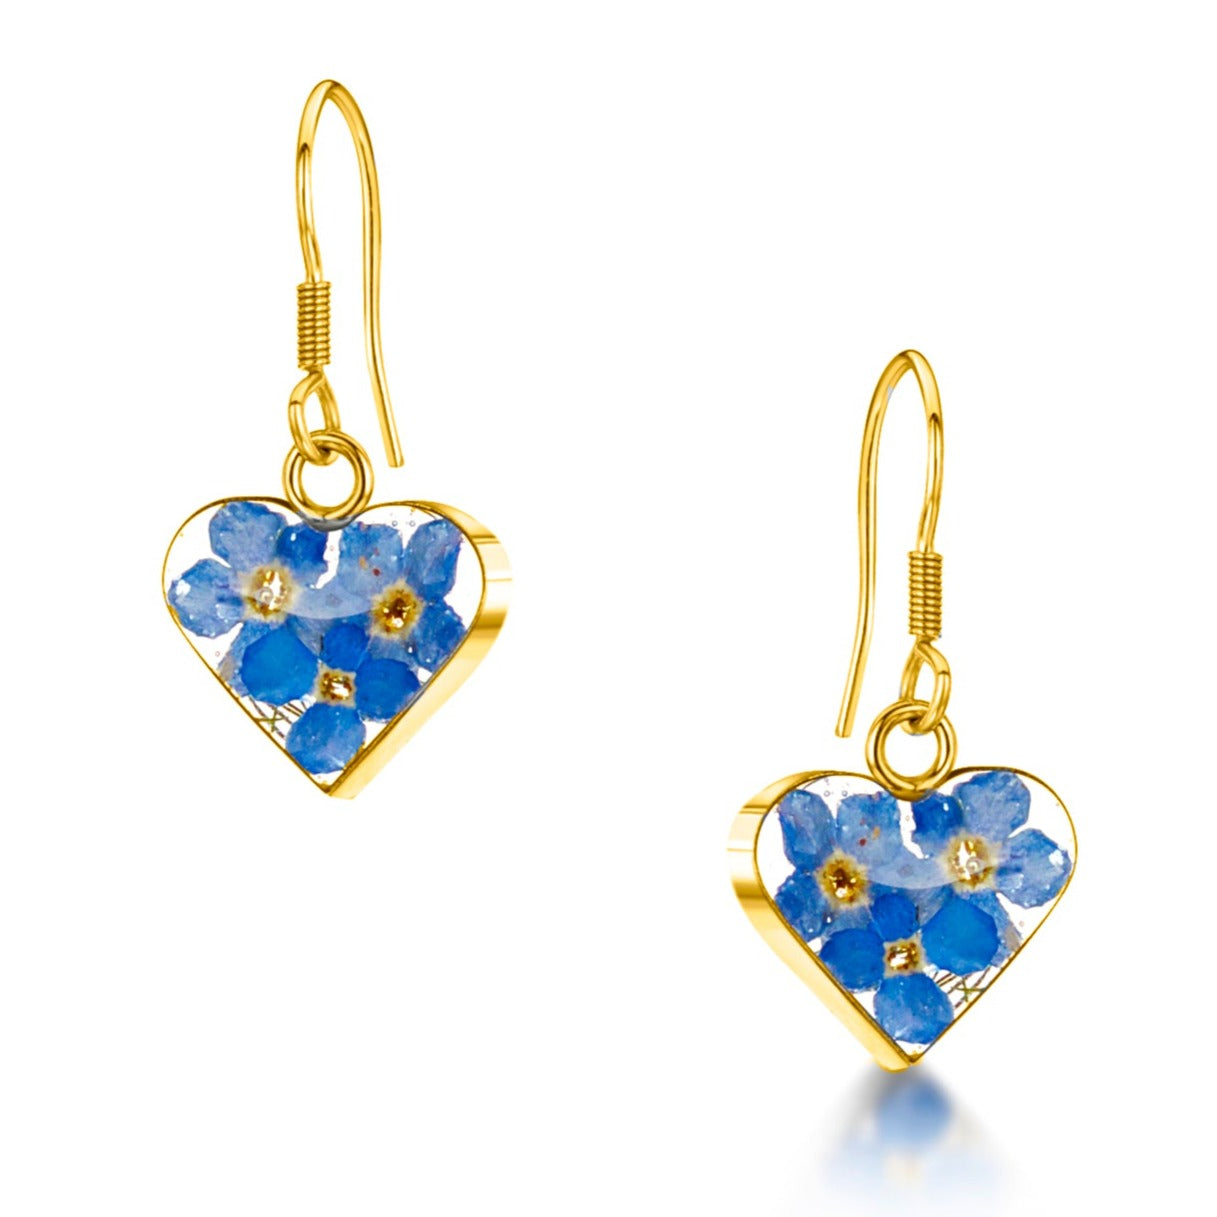 Forget-me-not gold-plated heart earrings